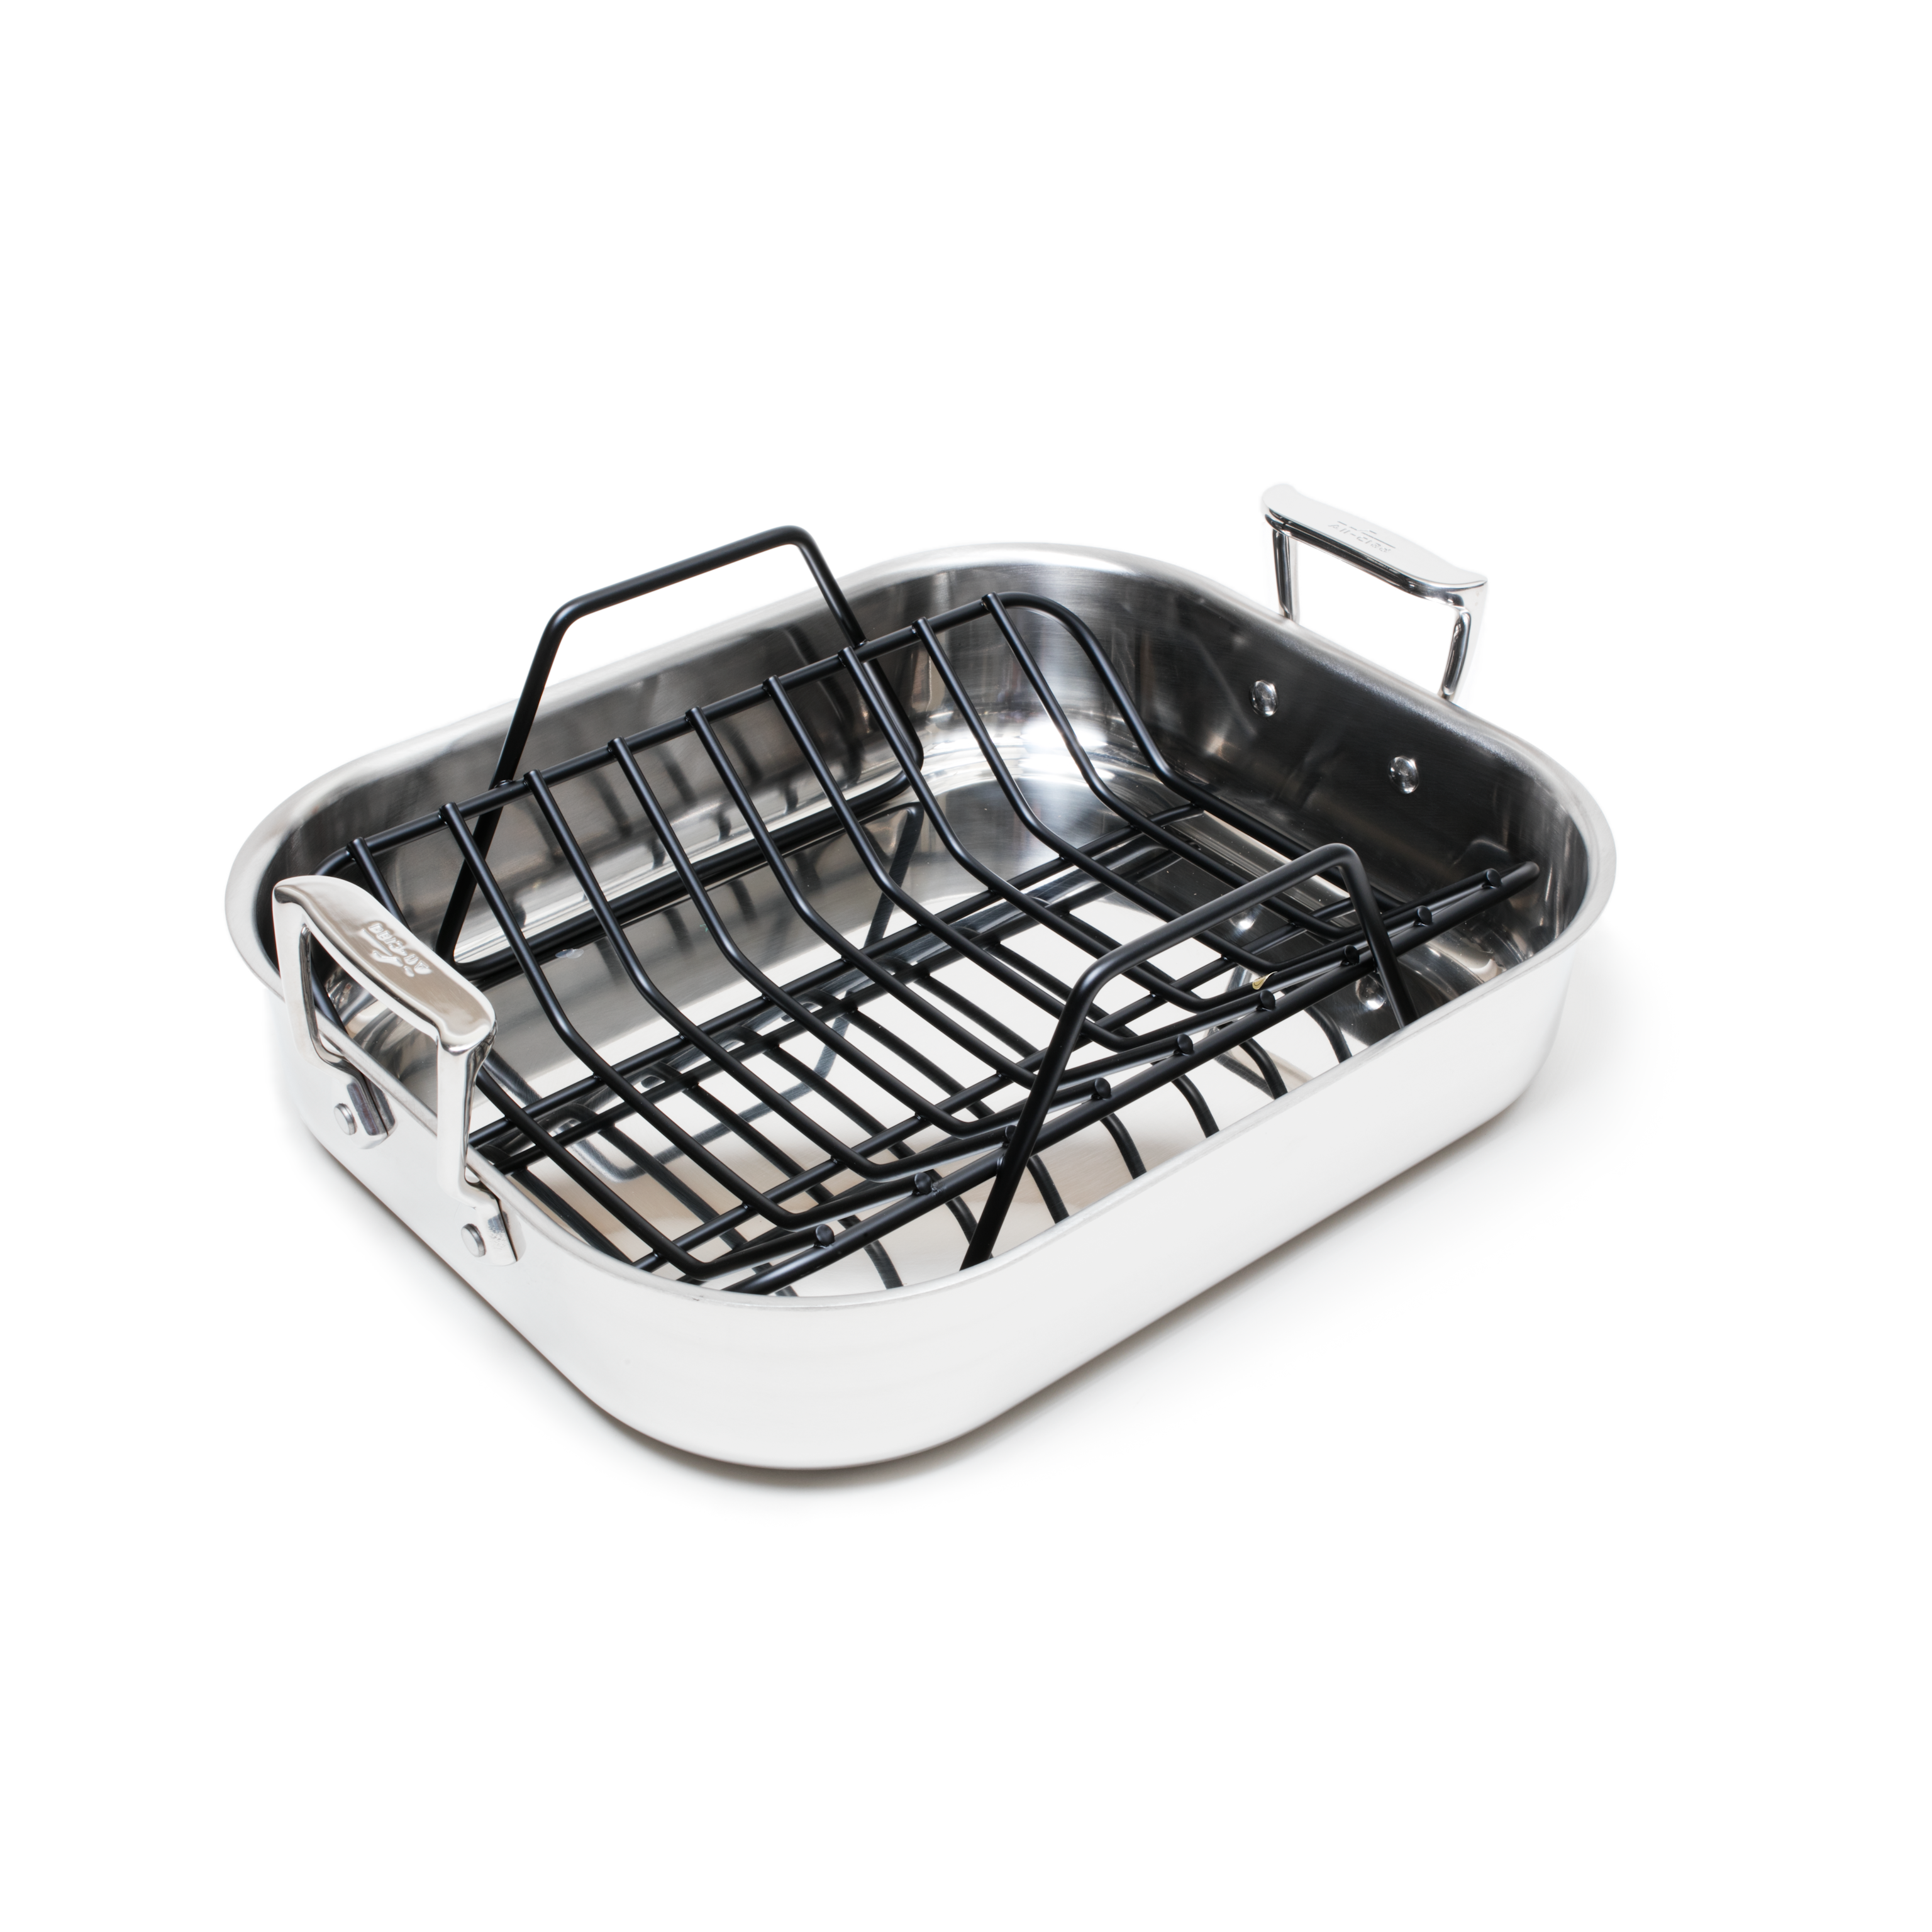 https://res.cloudinary.com/hksqkdlah/image/upload/37828_sil-smallroastingpans-all-clad-small-stainless-steel-roaster-with-rack-8400000029.png